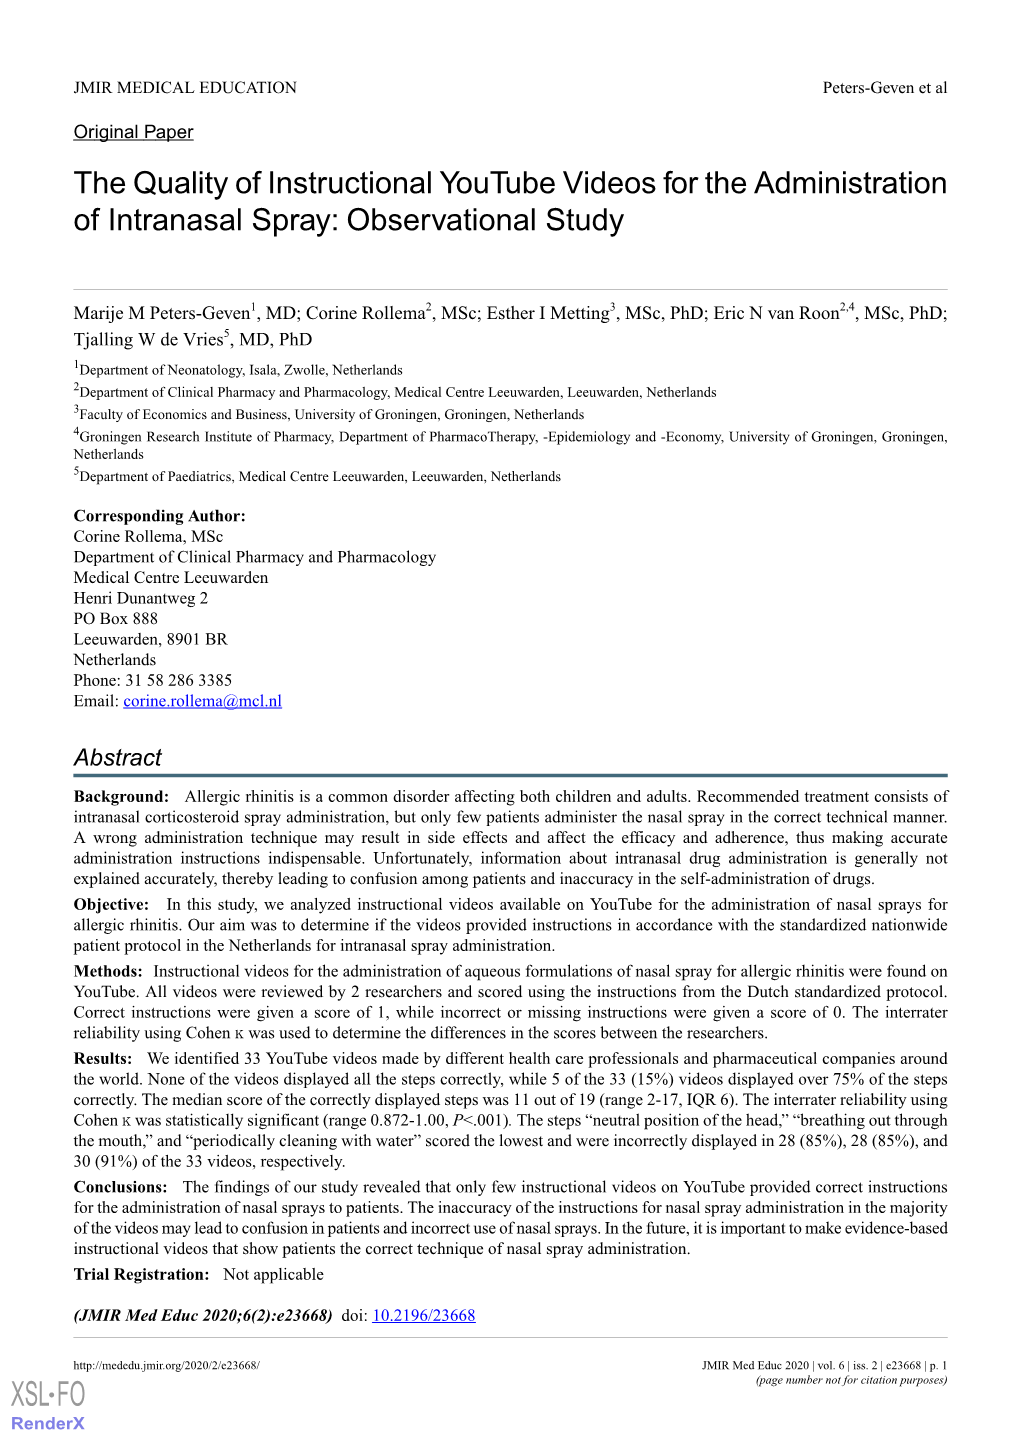 The Quality of Instructional Youtube Videos for the Administration of Intranasal Spray: Observational Study